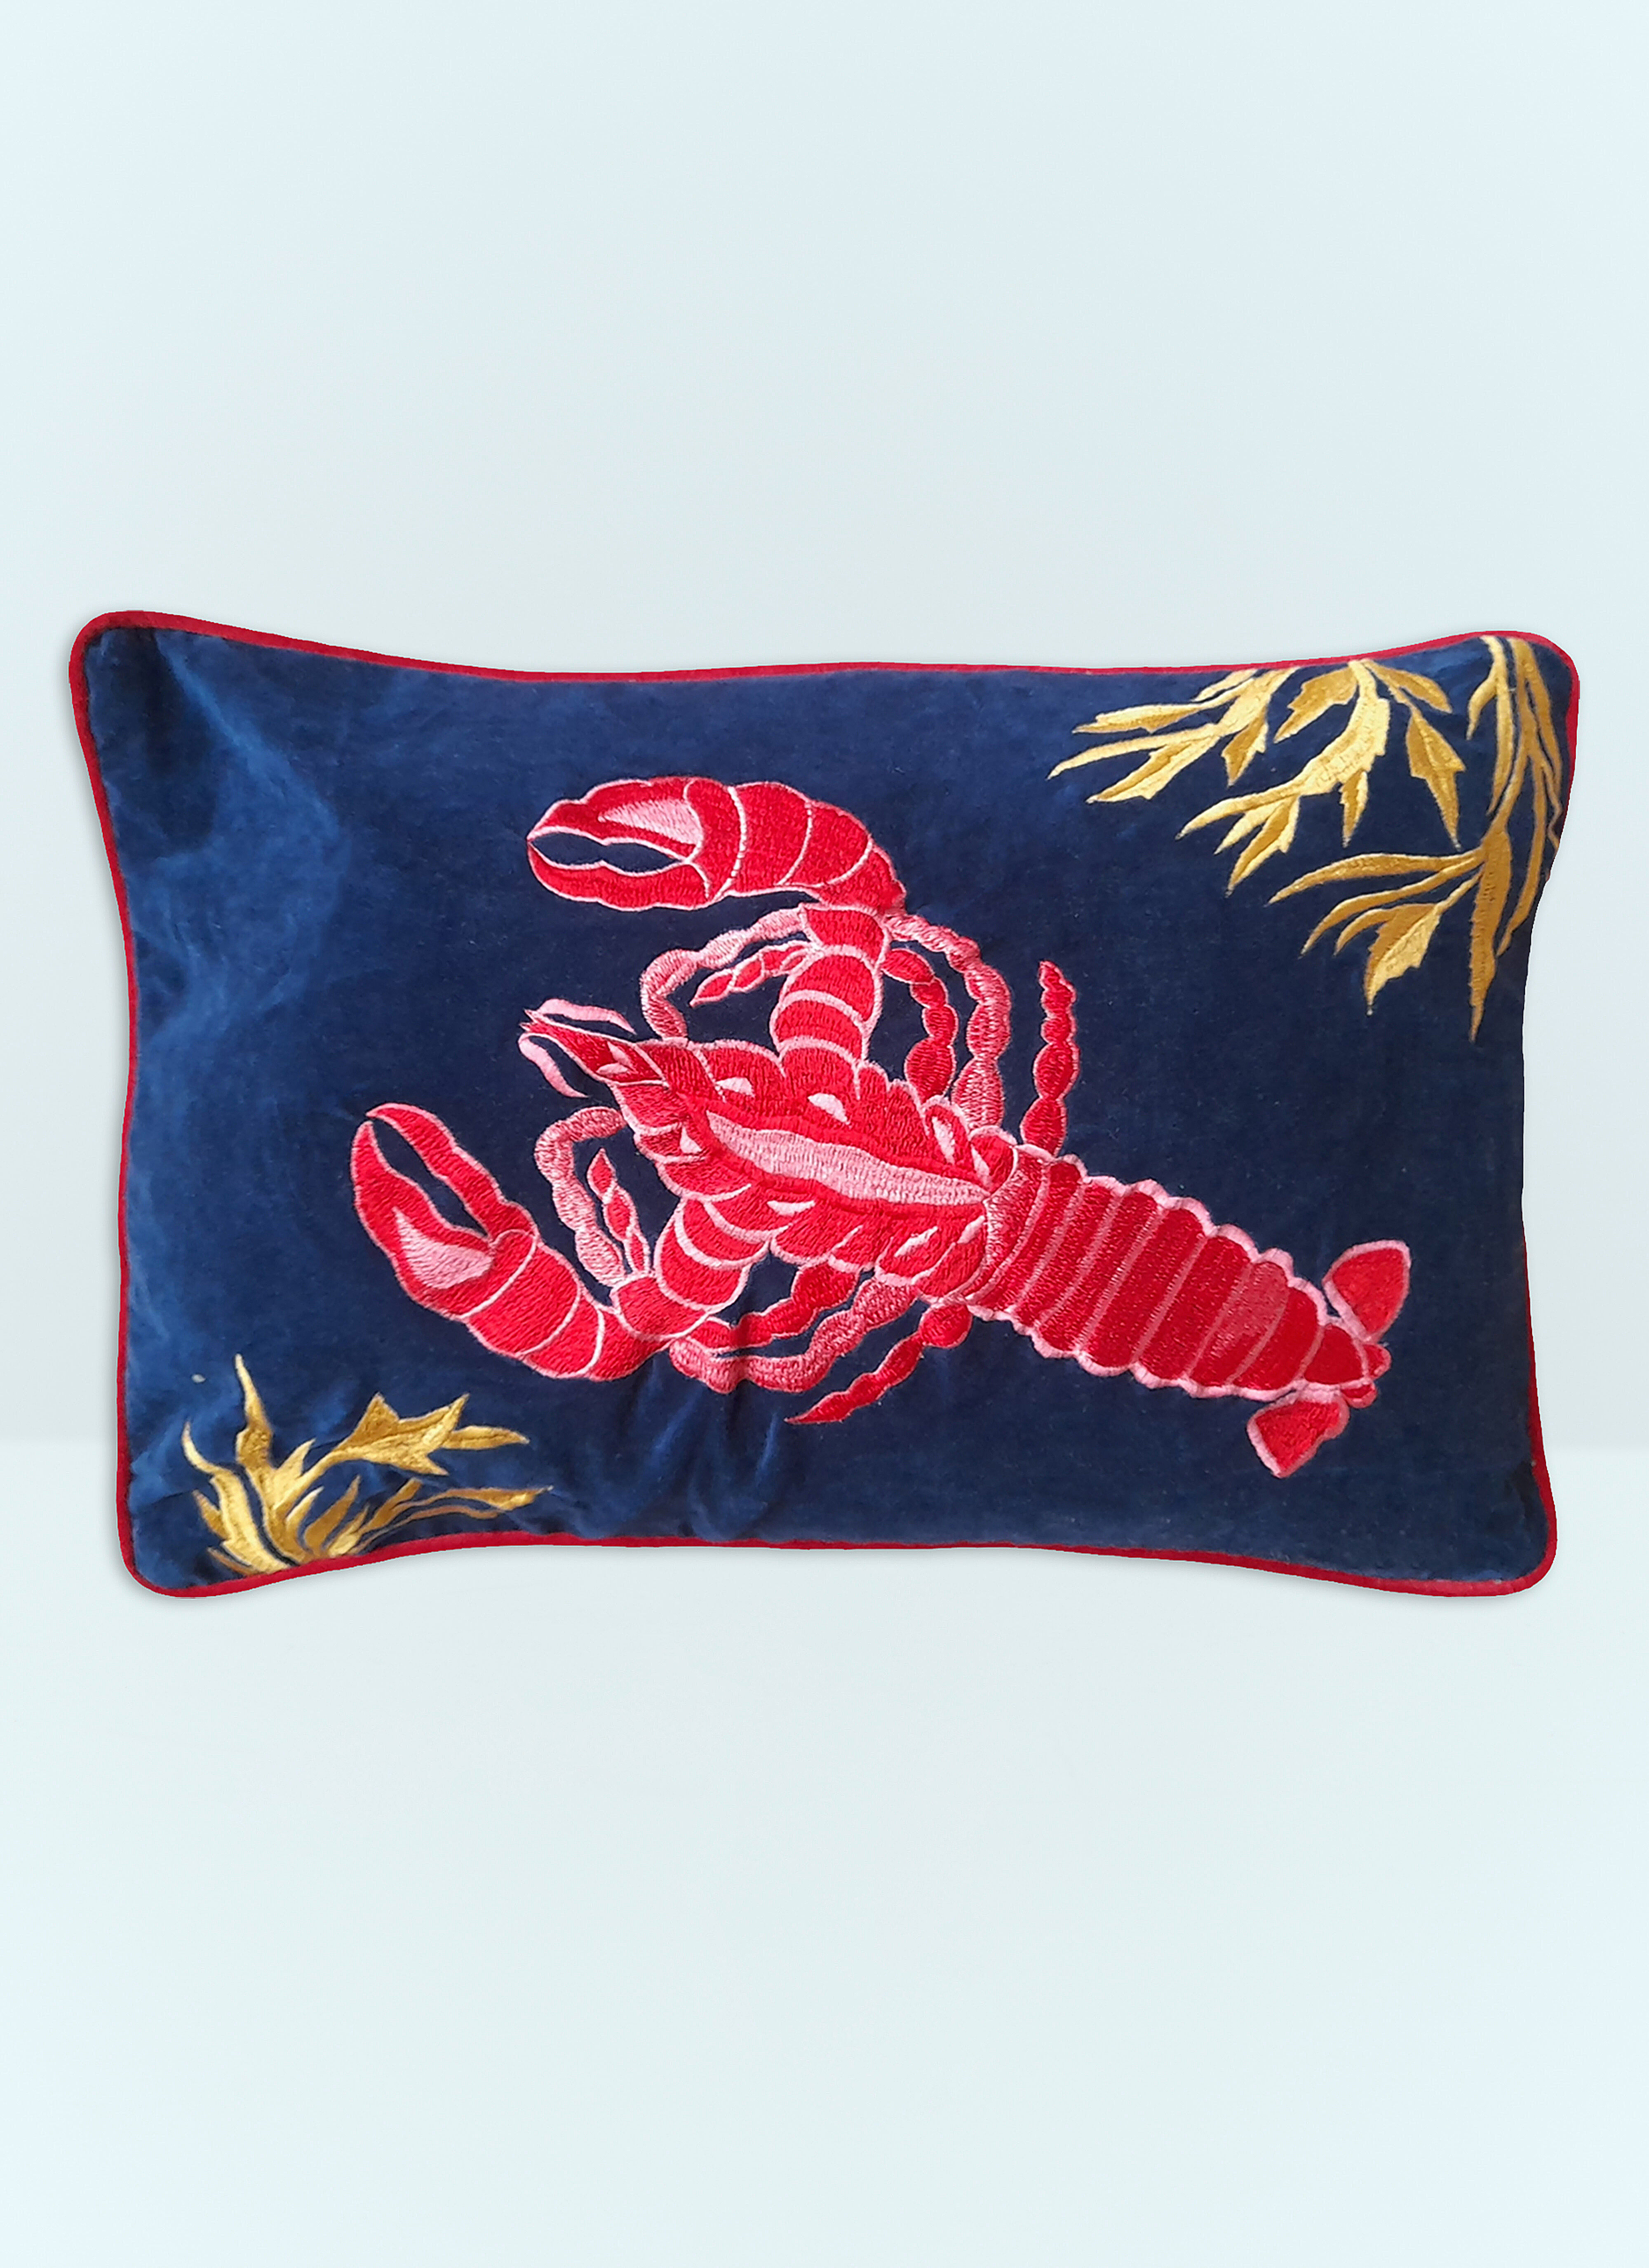 Les Ottomans Rock Lobster Embroidered Cushion White wps0691173